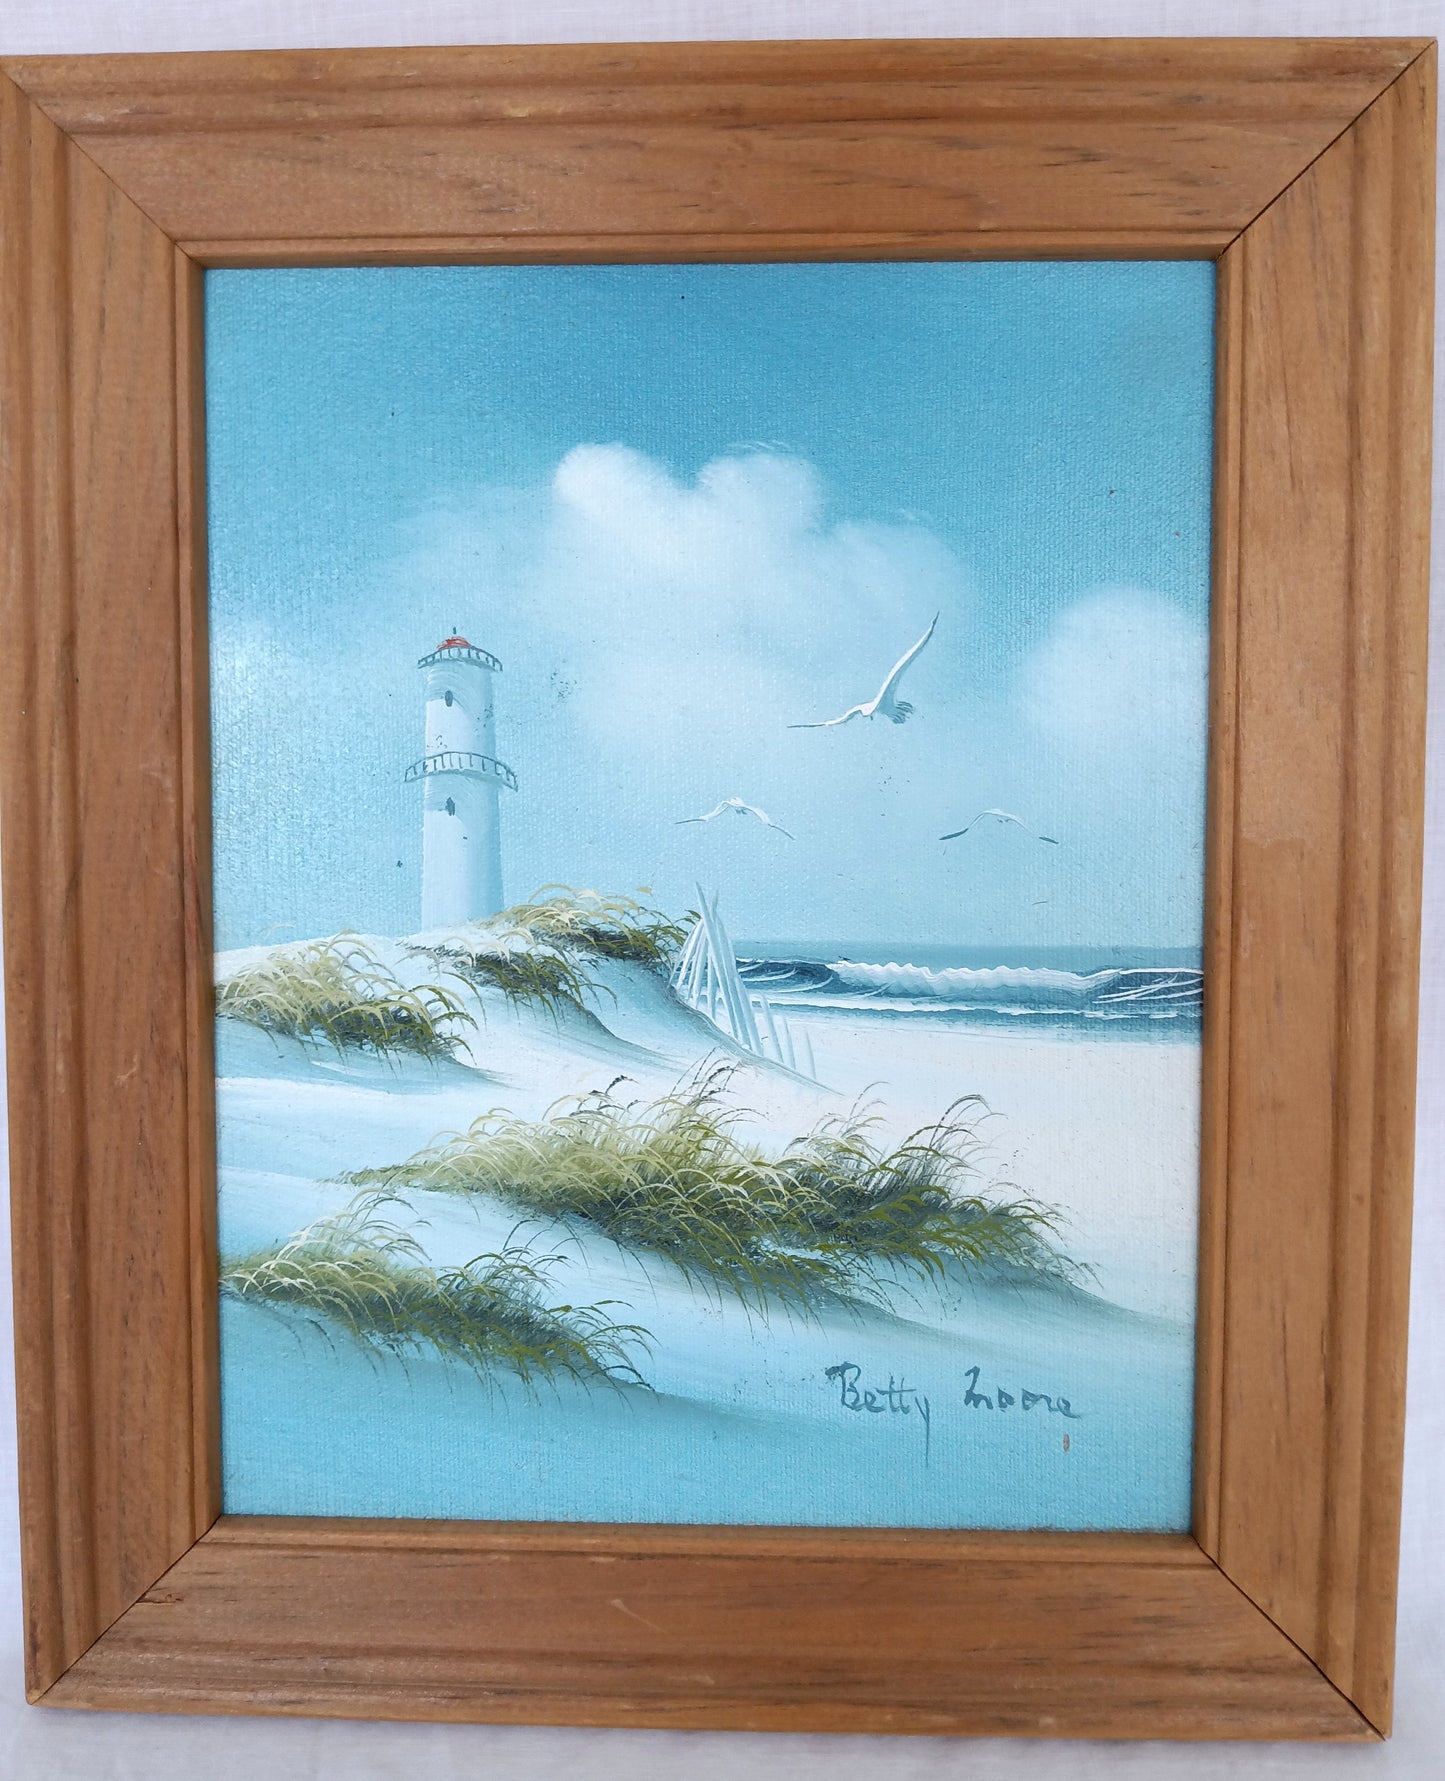 Vintage Oil on Canvas Framed Painting Lighthouse Beach Scene Seascape Seagull Nautical Wall Art Signed Betty Moore